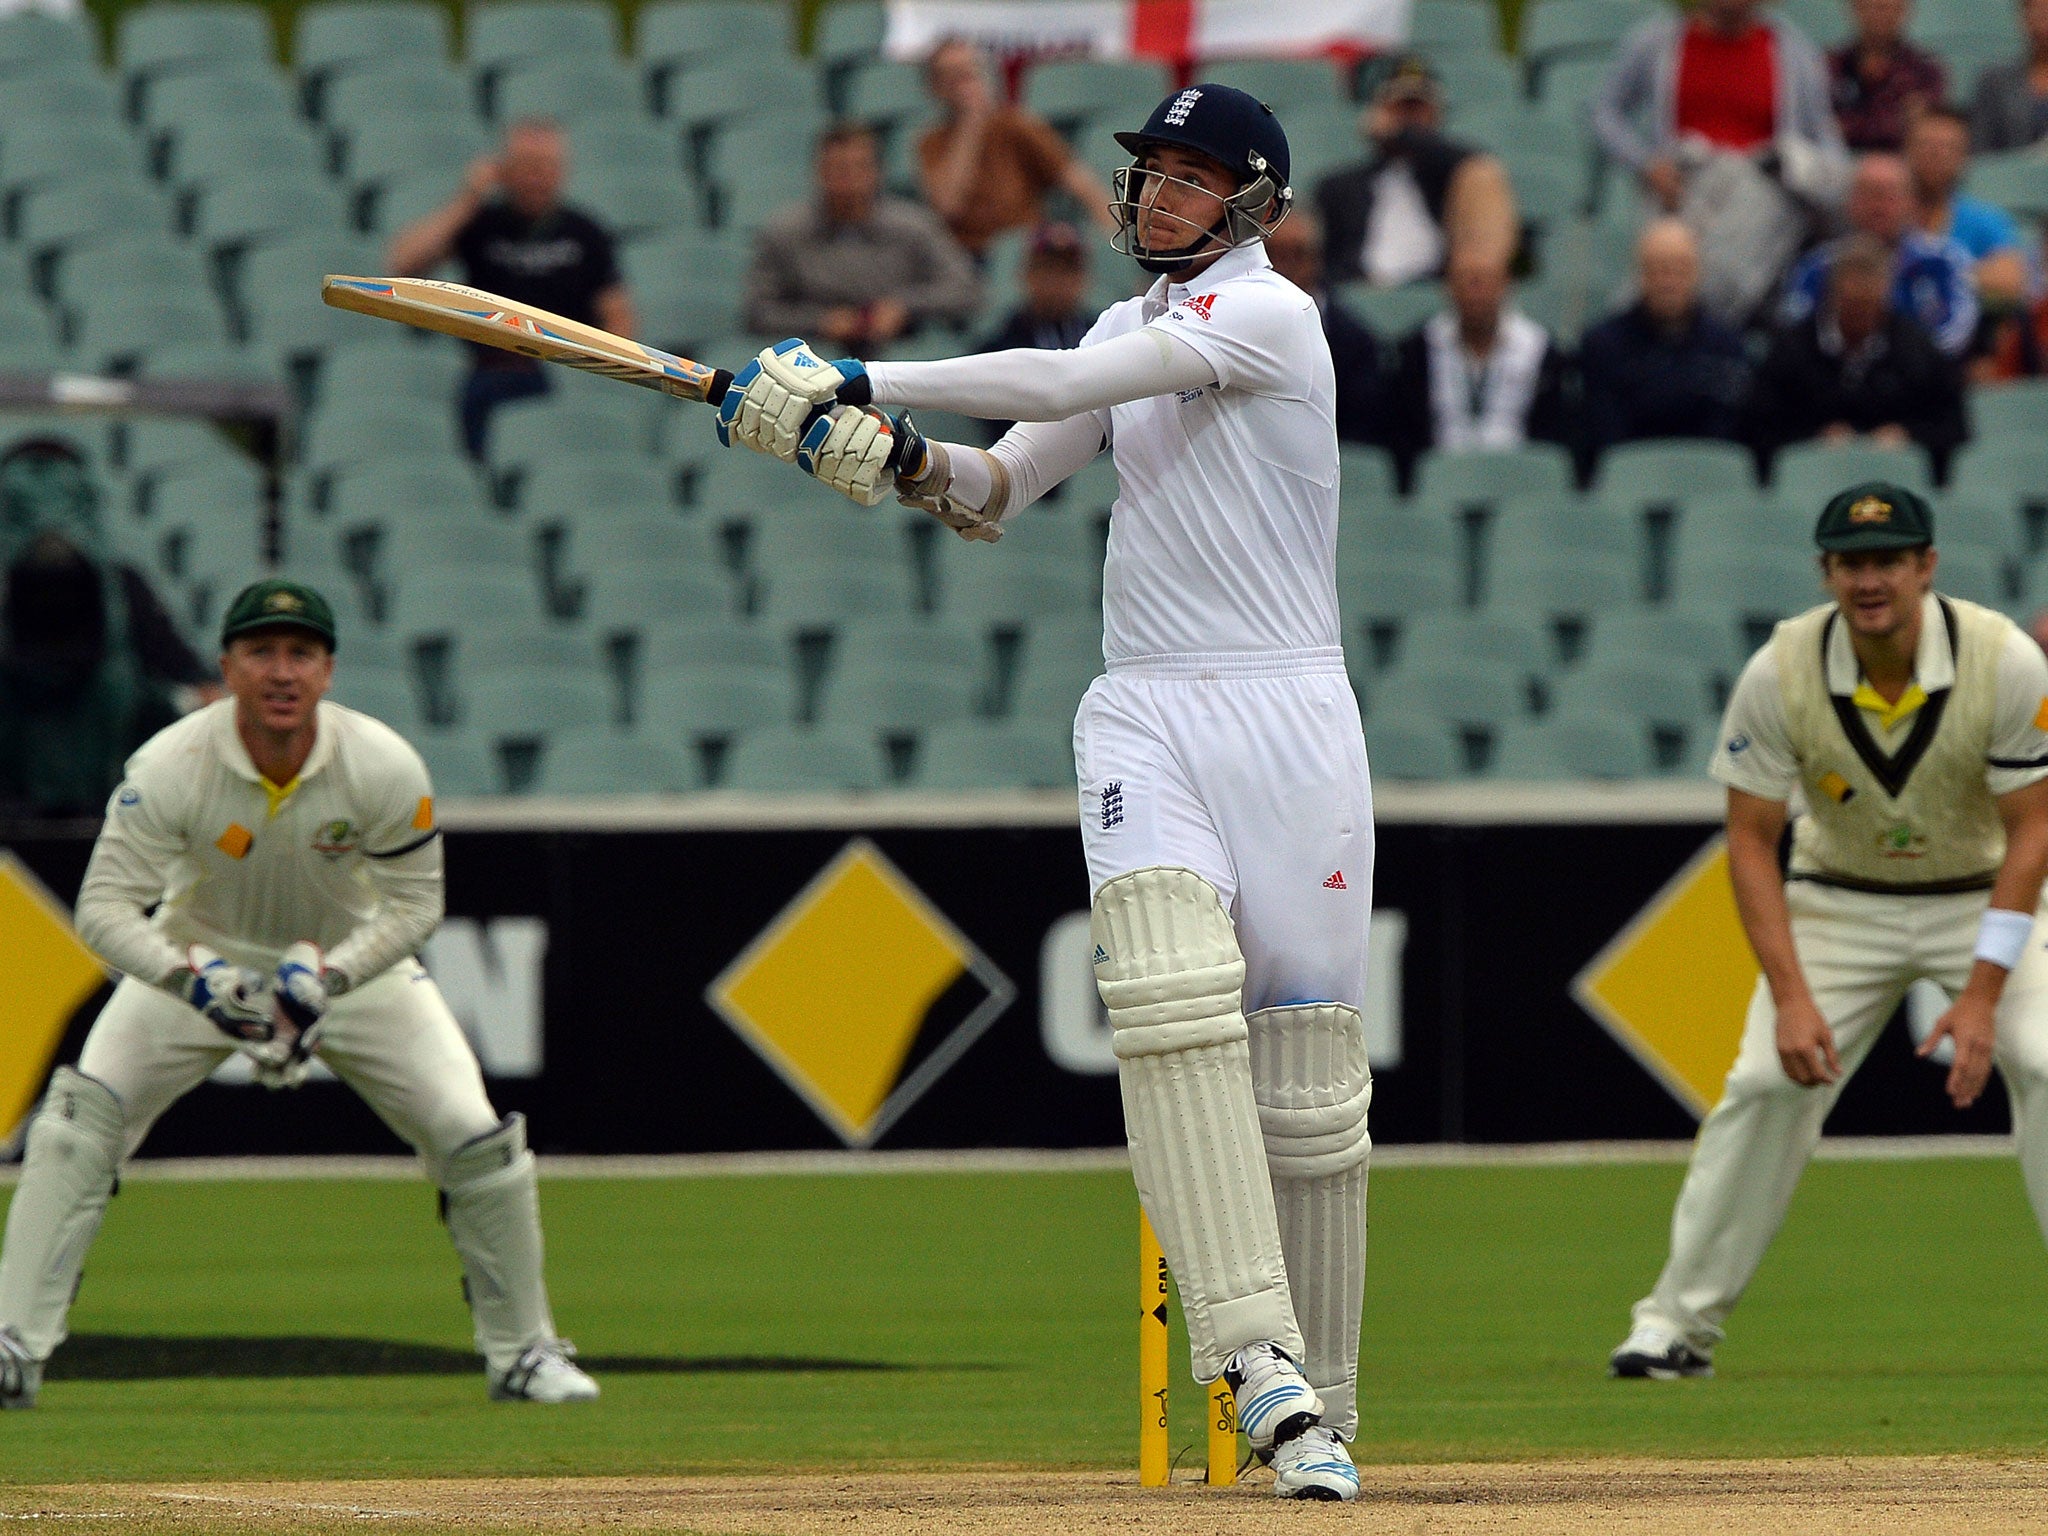 Stuart Broad suffered a thoughtless dismissal in the day’s first over